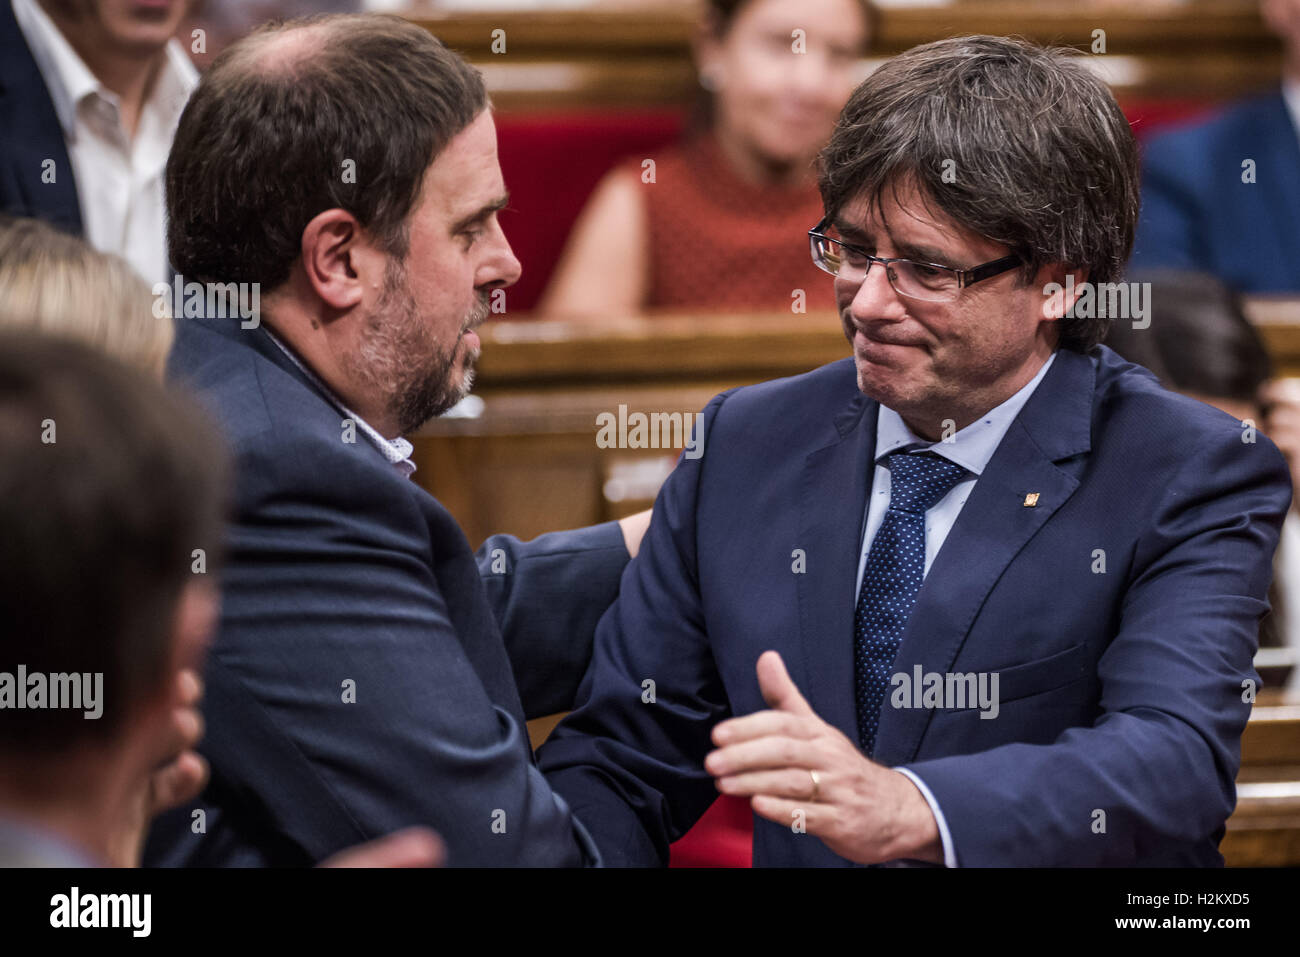 Barcelona, Catalonia, Spain. 29th Sep, 2016. CARLES PUIGDEMONT, President of the Catalan Government, is congratulates by ORIOL JUNQUERAS, Vice-Prsident of the Catalan government, after he wins the motion of confidence in the Catalan parliament Credit:  Matthias Oesterle/ZUMA Wire/Alamy Live News Stock Photo